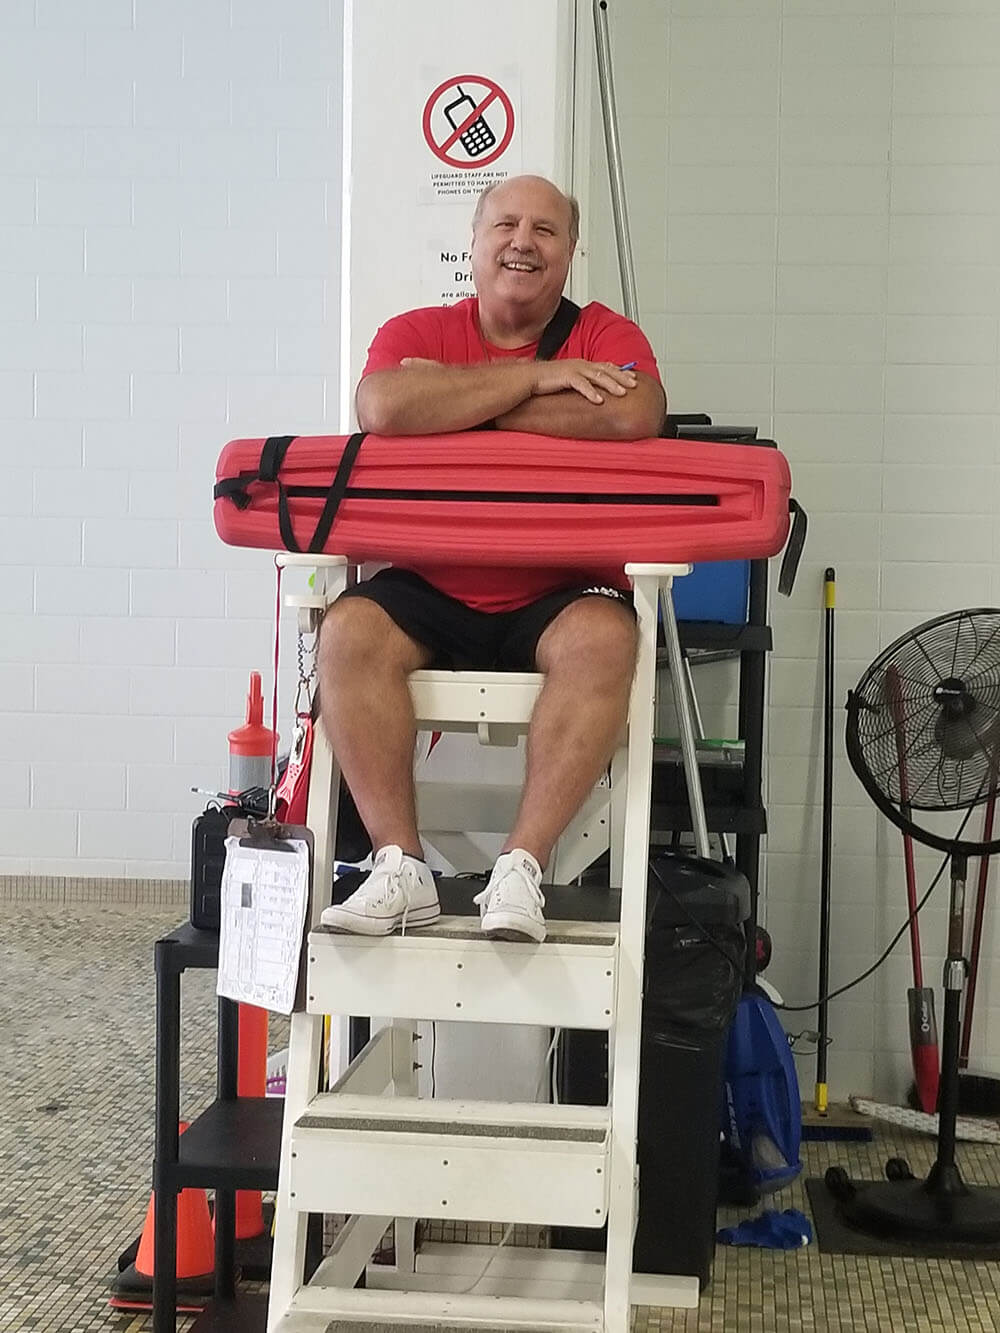 Larry the Lifeguard sitting on the Lifeguard stand